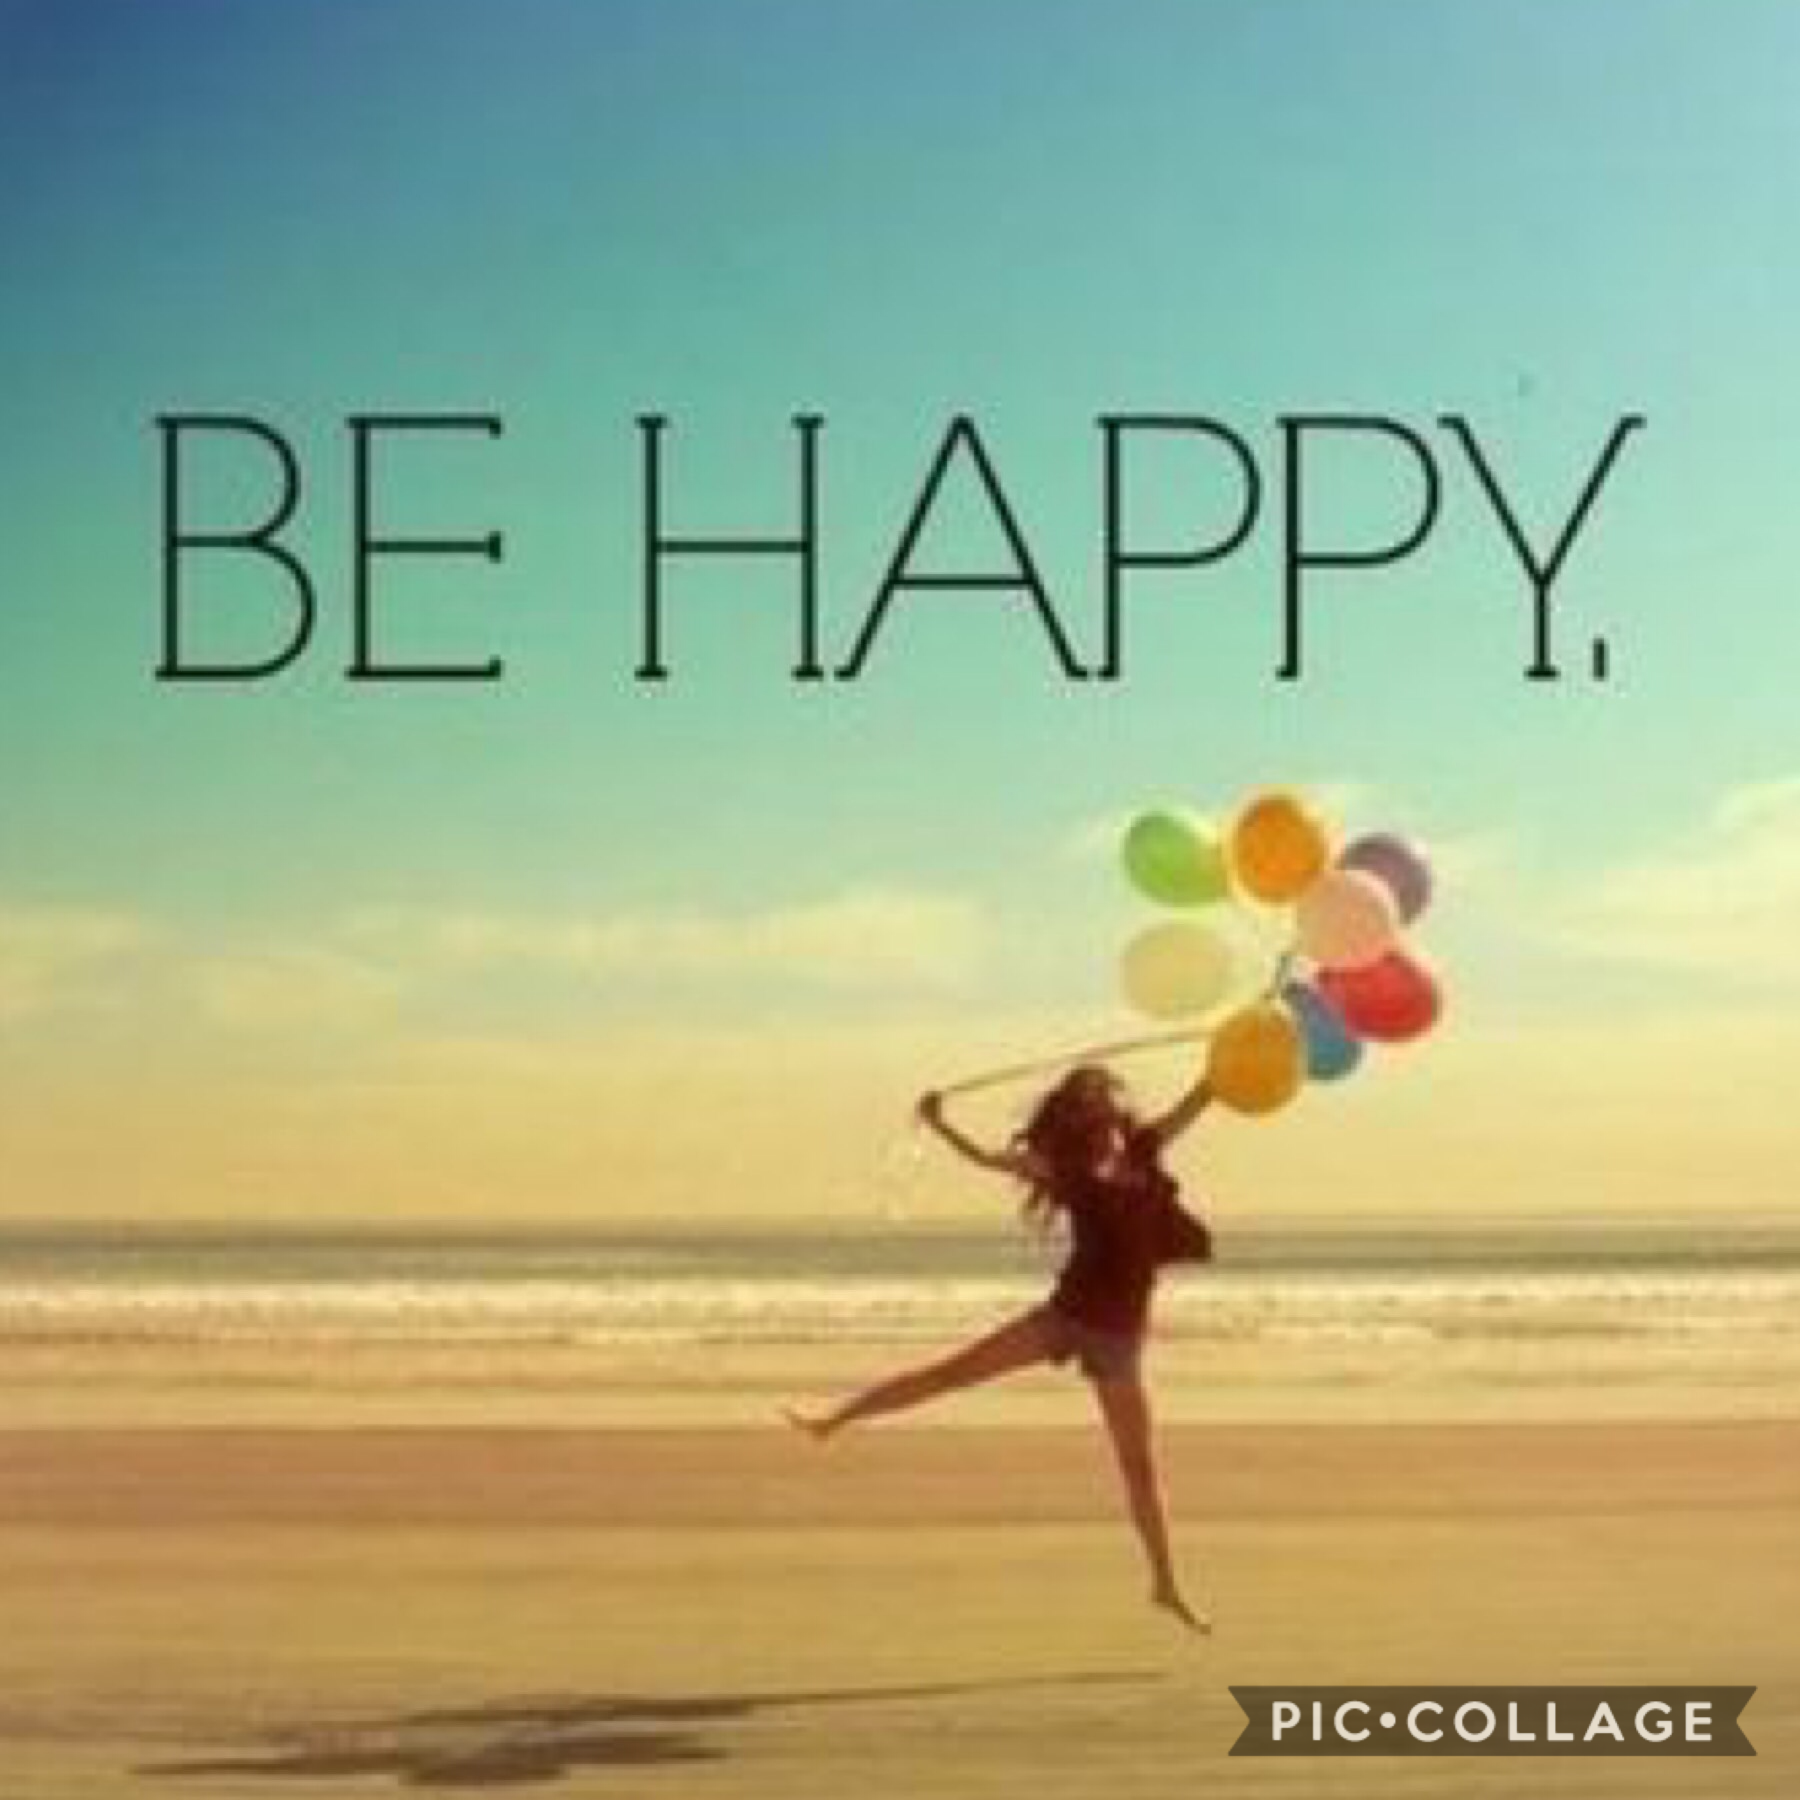 Be happy be bright be you